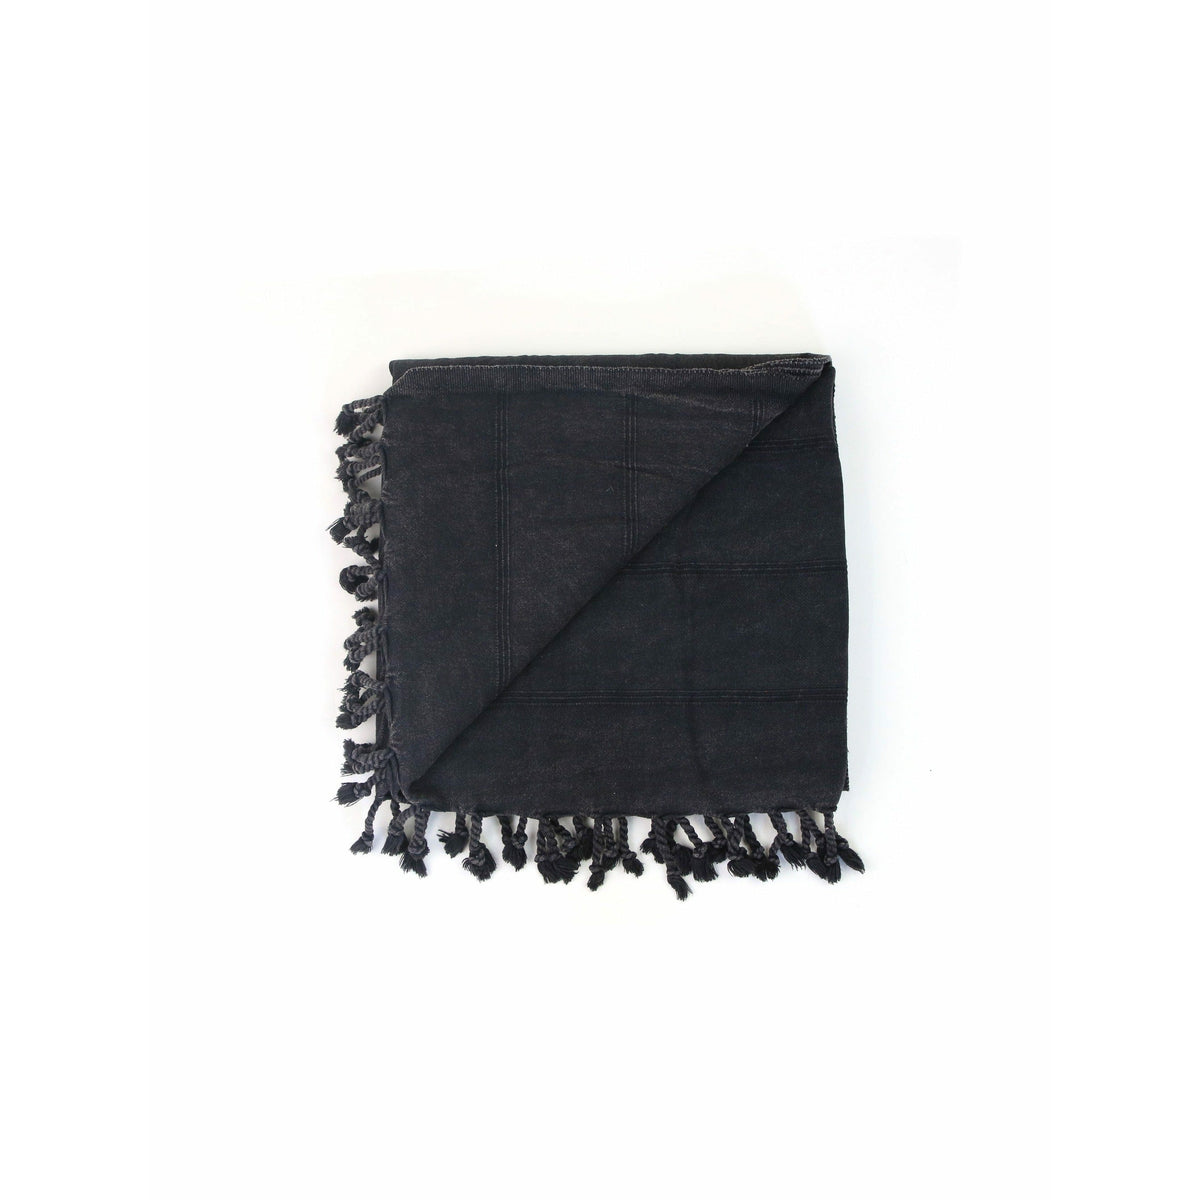 Sunkissed Charcoal / L • 100cm x 180cm • 40&quot;W x 72&quot;L Bali • Sand Free Beach Towel by Sunkissed